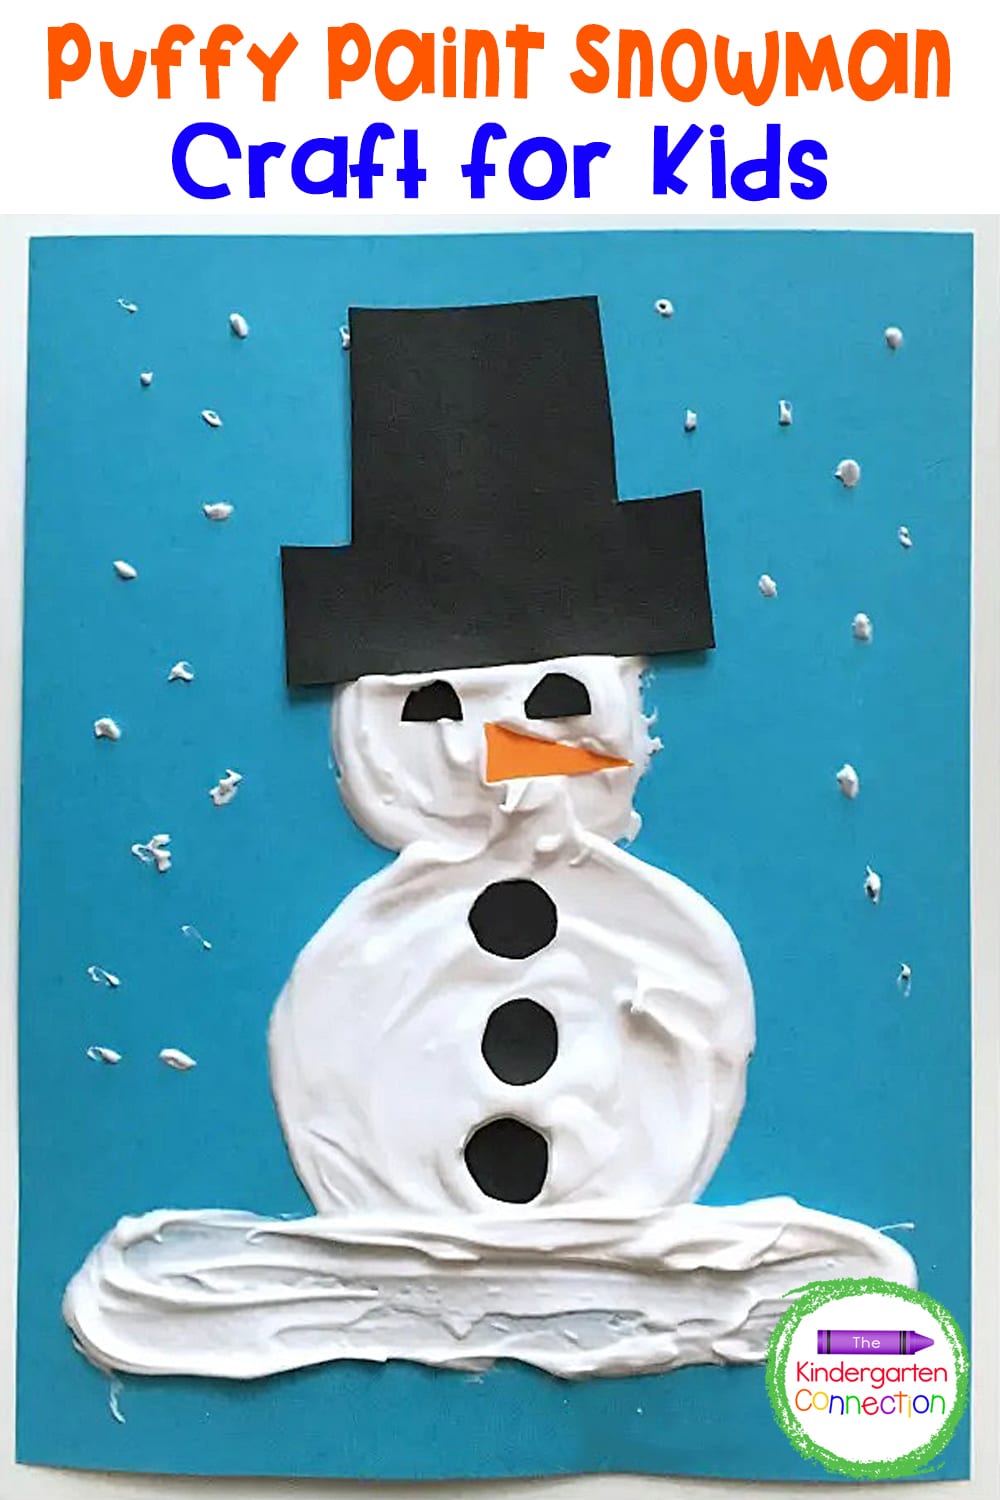 This Puffy Paint Snowman Craft for Kids is perfect for celebrating the winter season! Use it to decorate your winter bulletin boards!